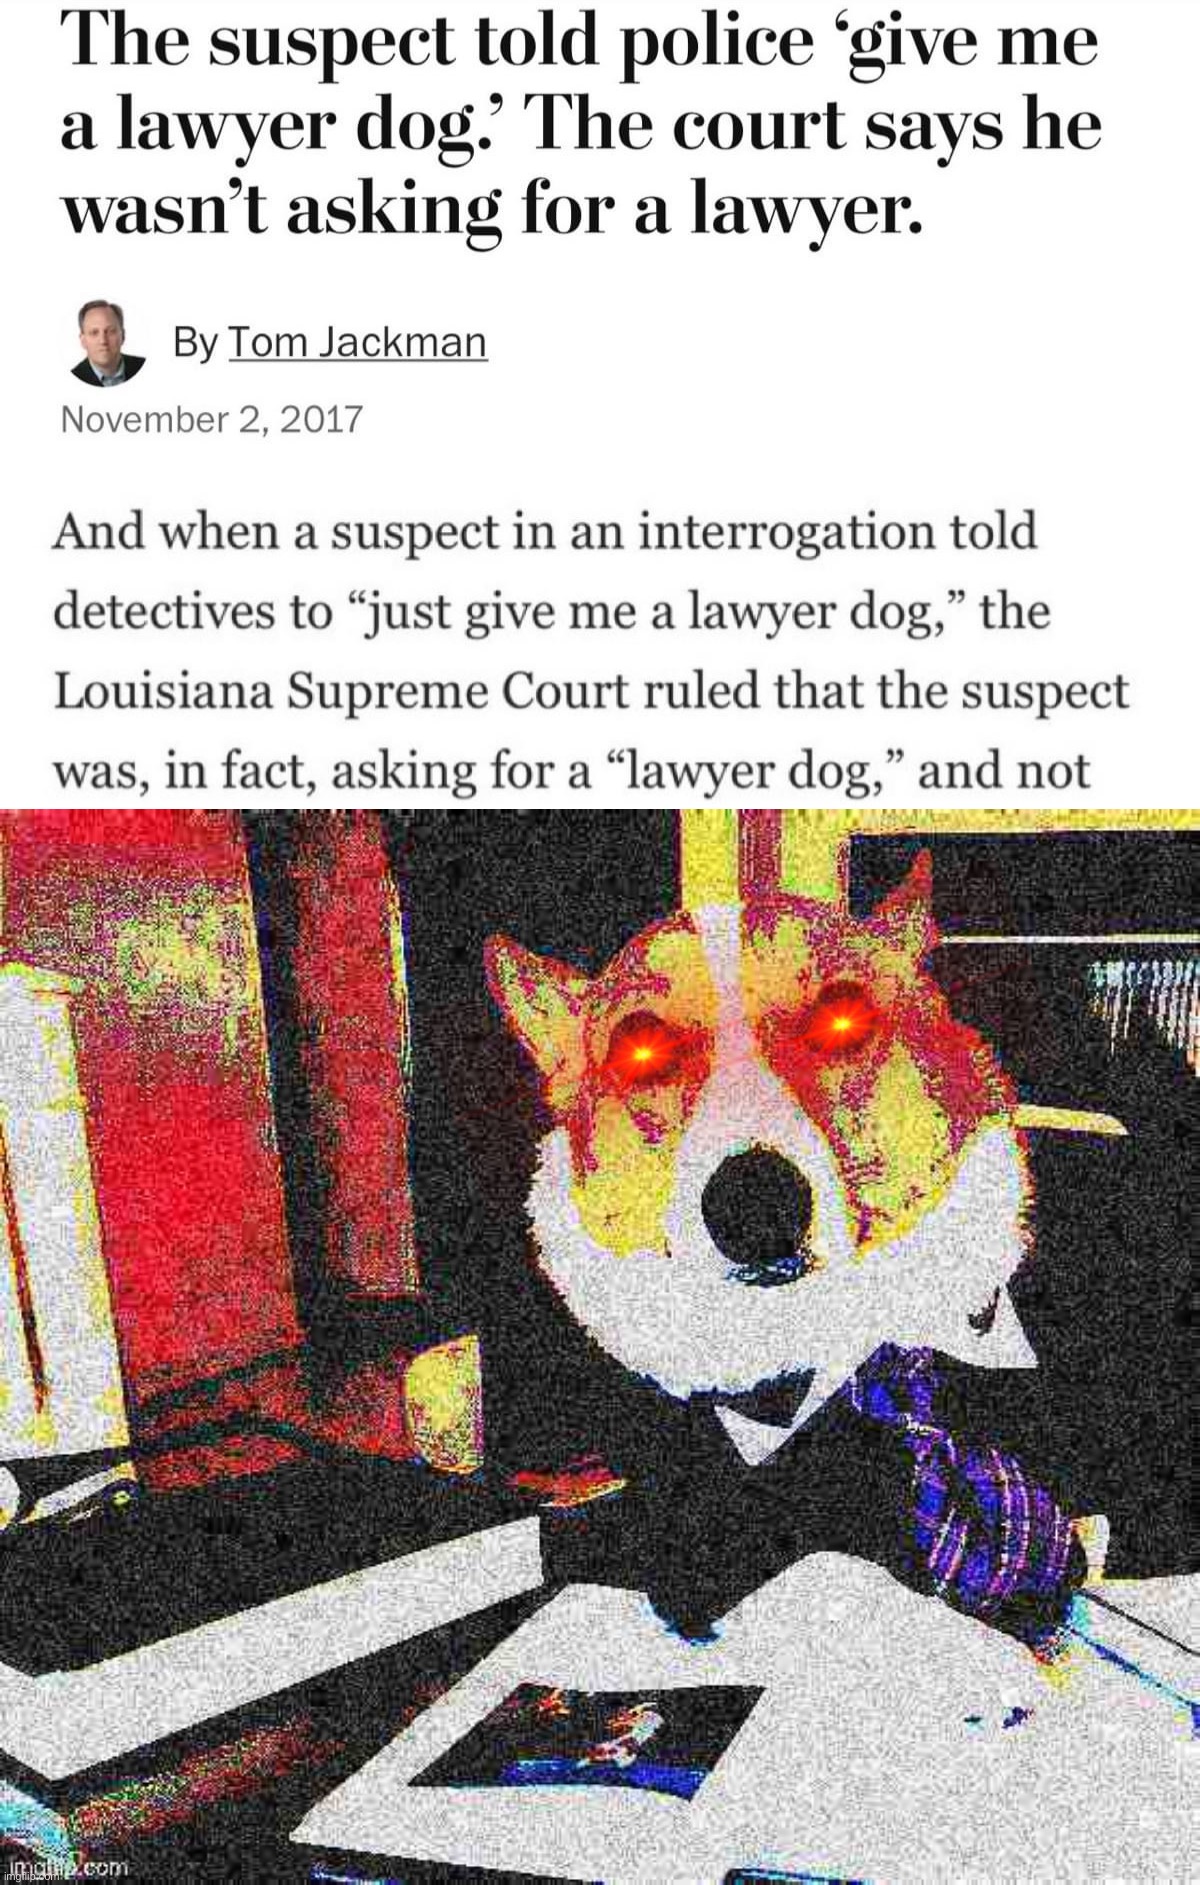 *angry lawyer dog noises* | image tagged in give me a lawyer dog,lawyer corgi dog deep-fried,lawyer,lawyer dog,lawyer corgi dog,lawyers | made w/ Imgflip meme maker